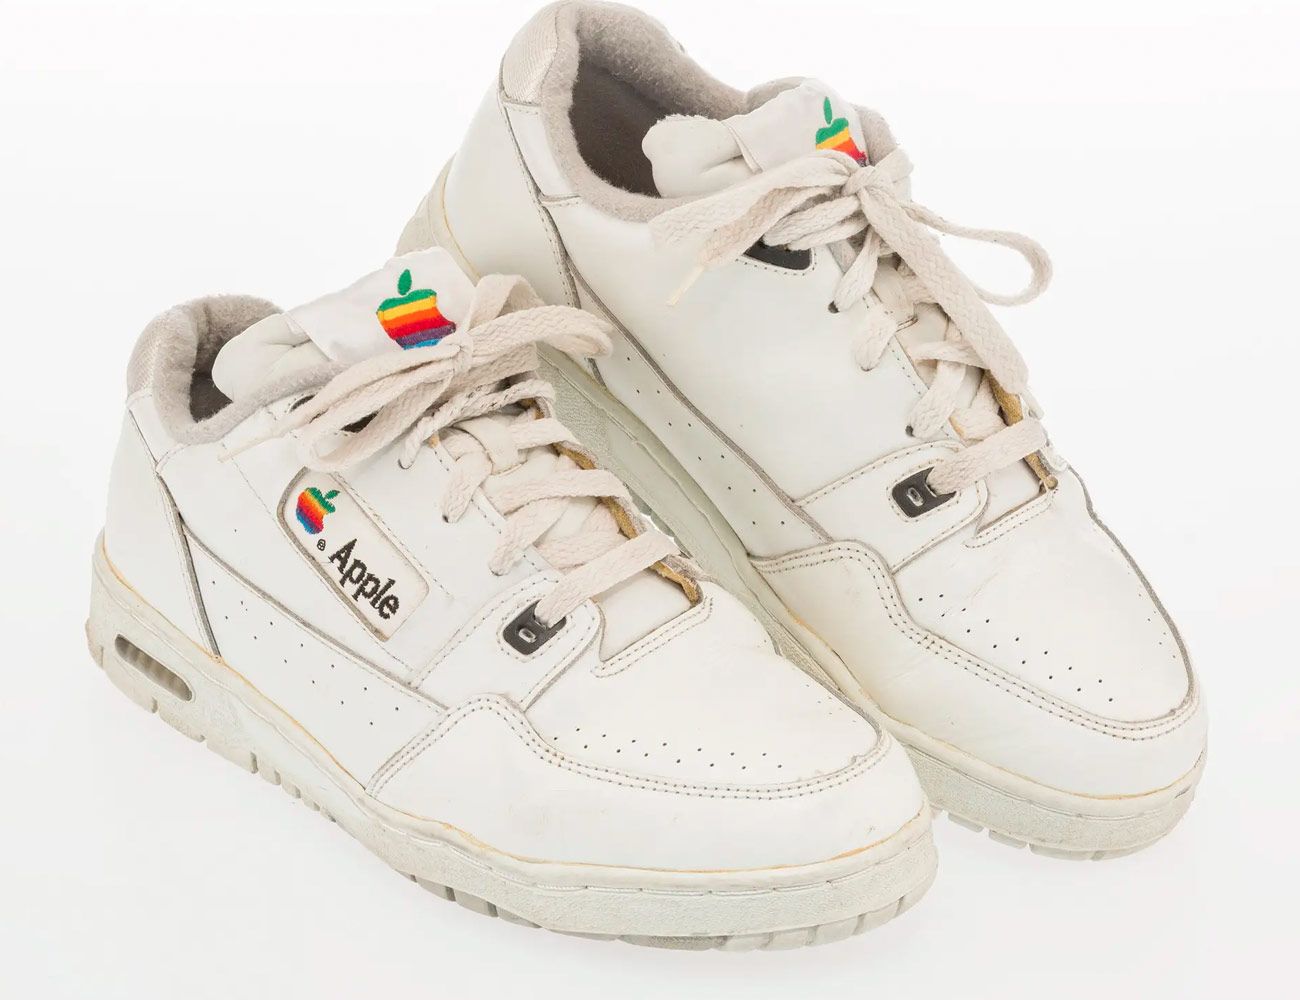 Order Your Own Apple Employee Sneakers